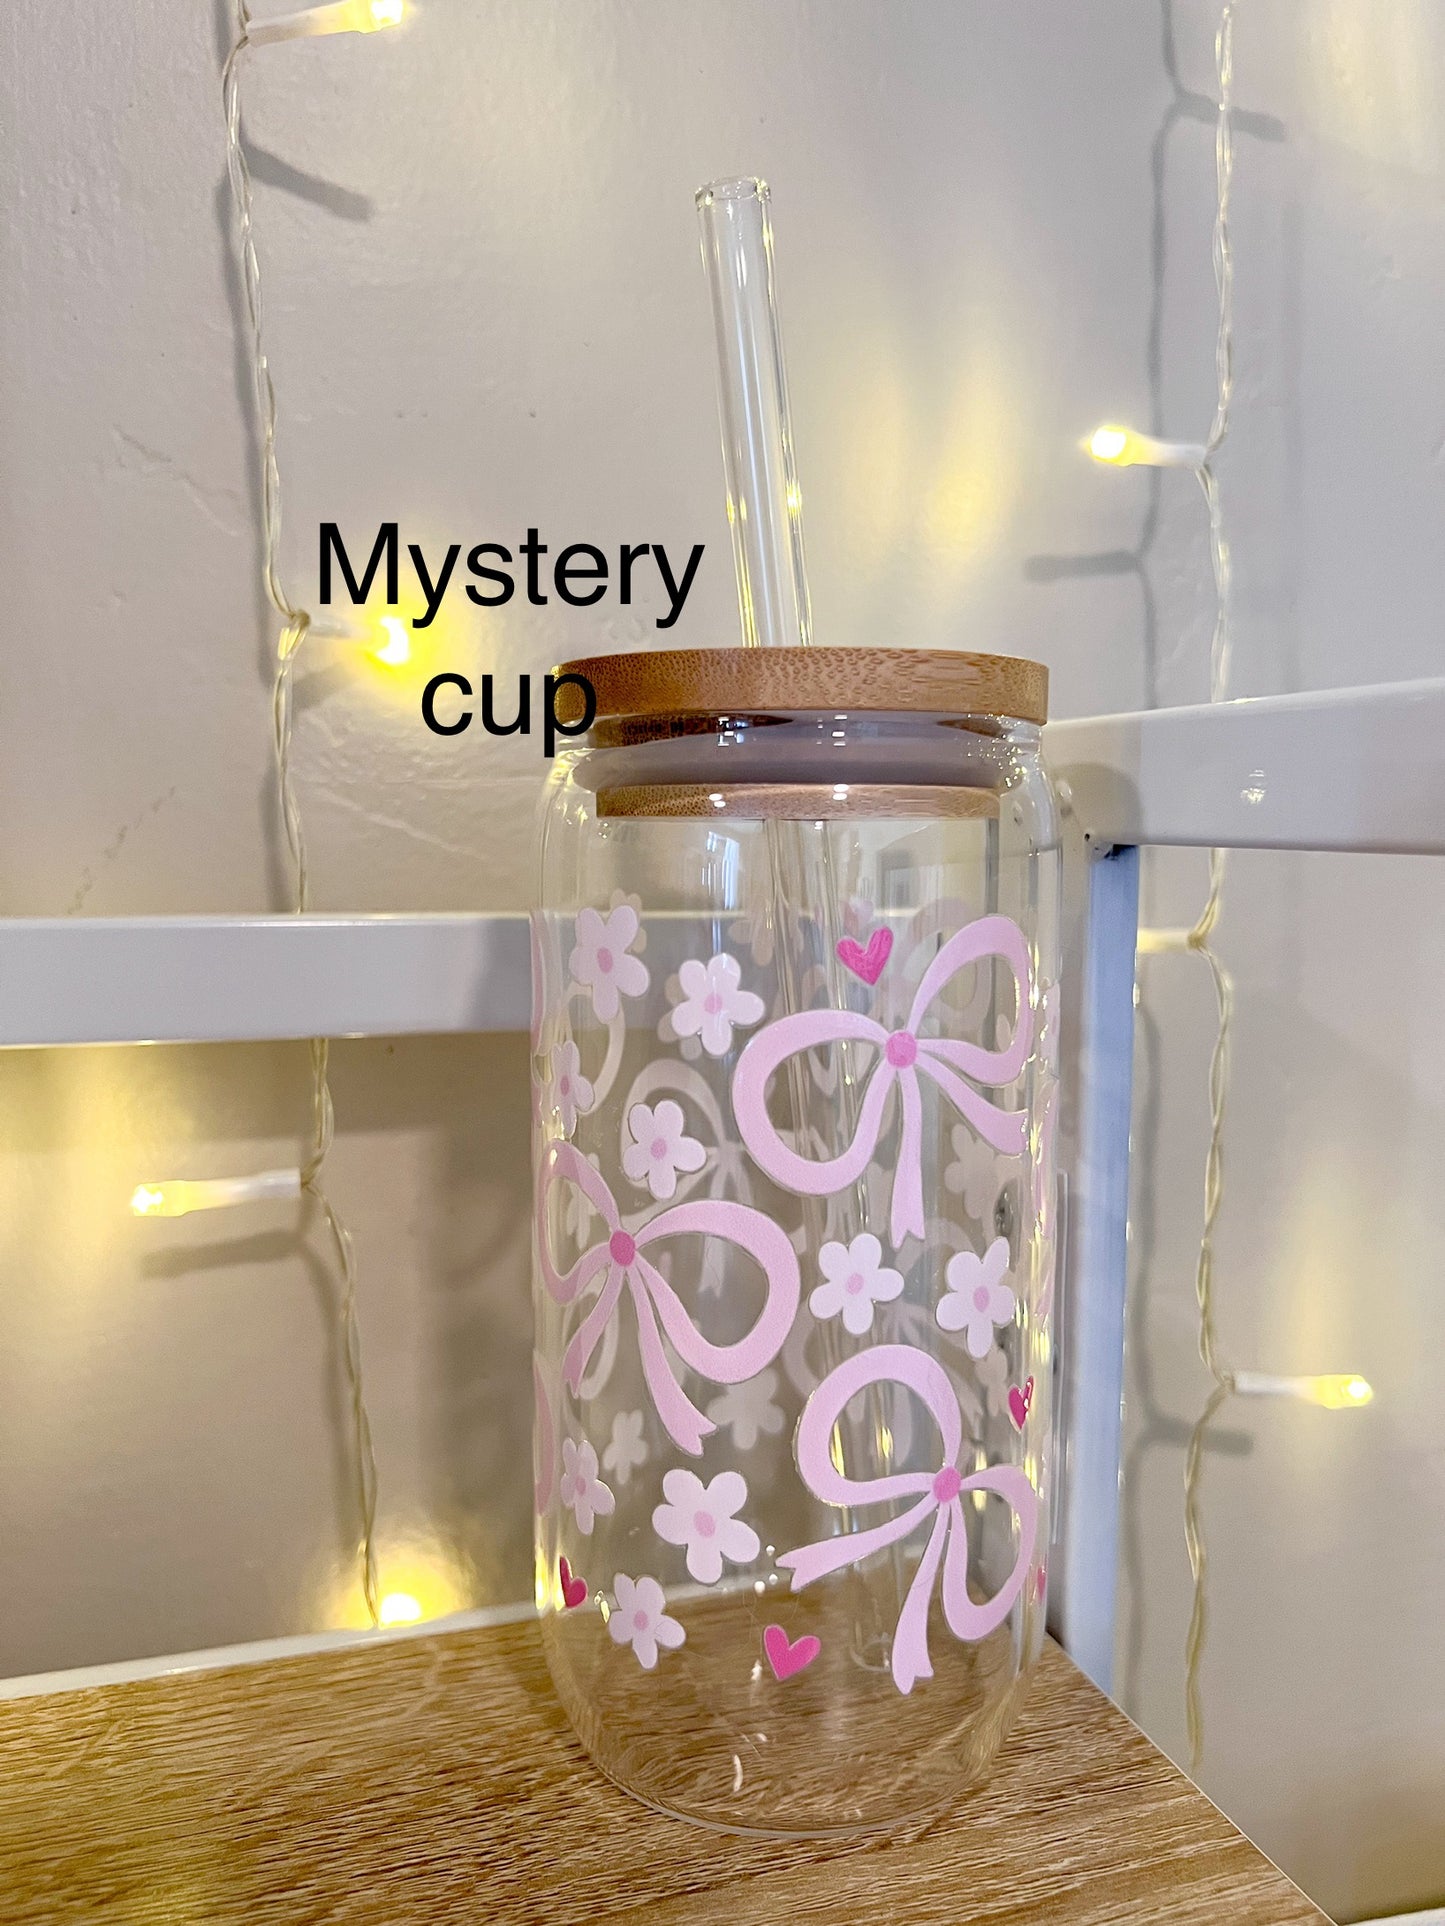 Mystery Cup